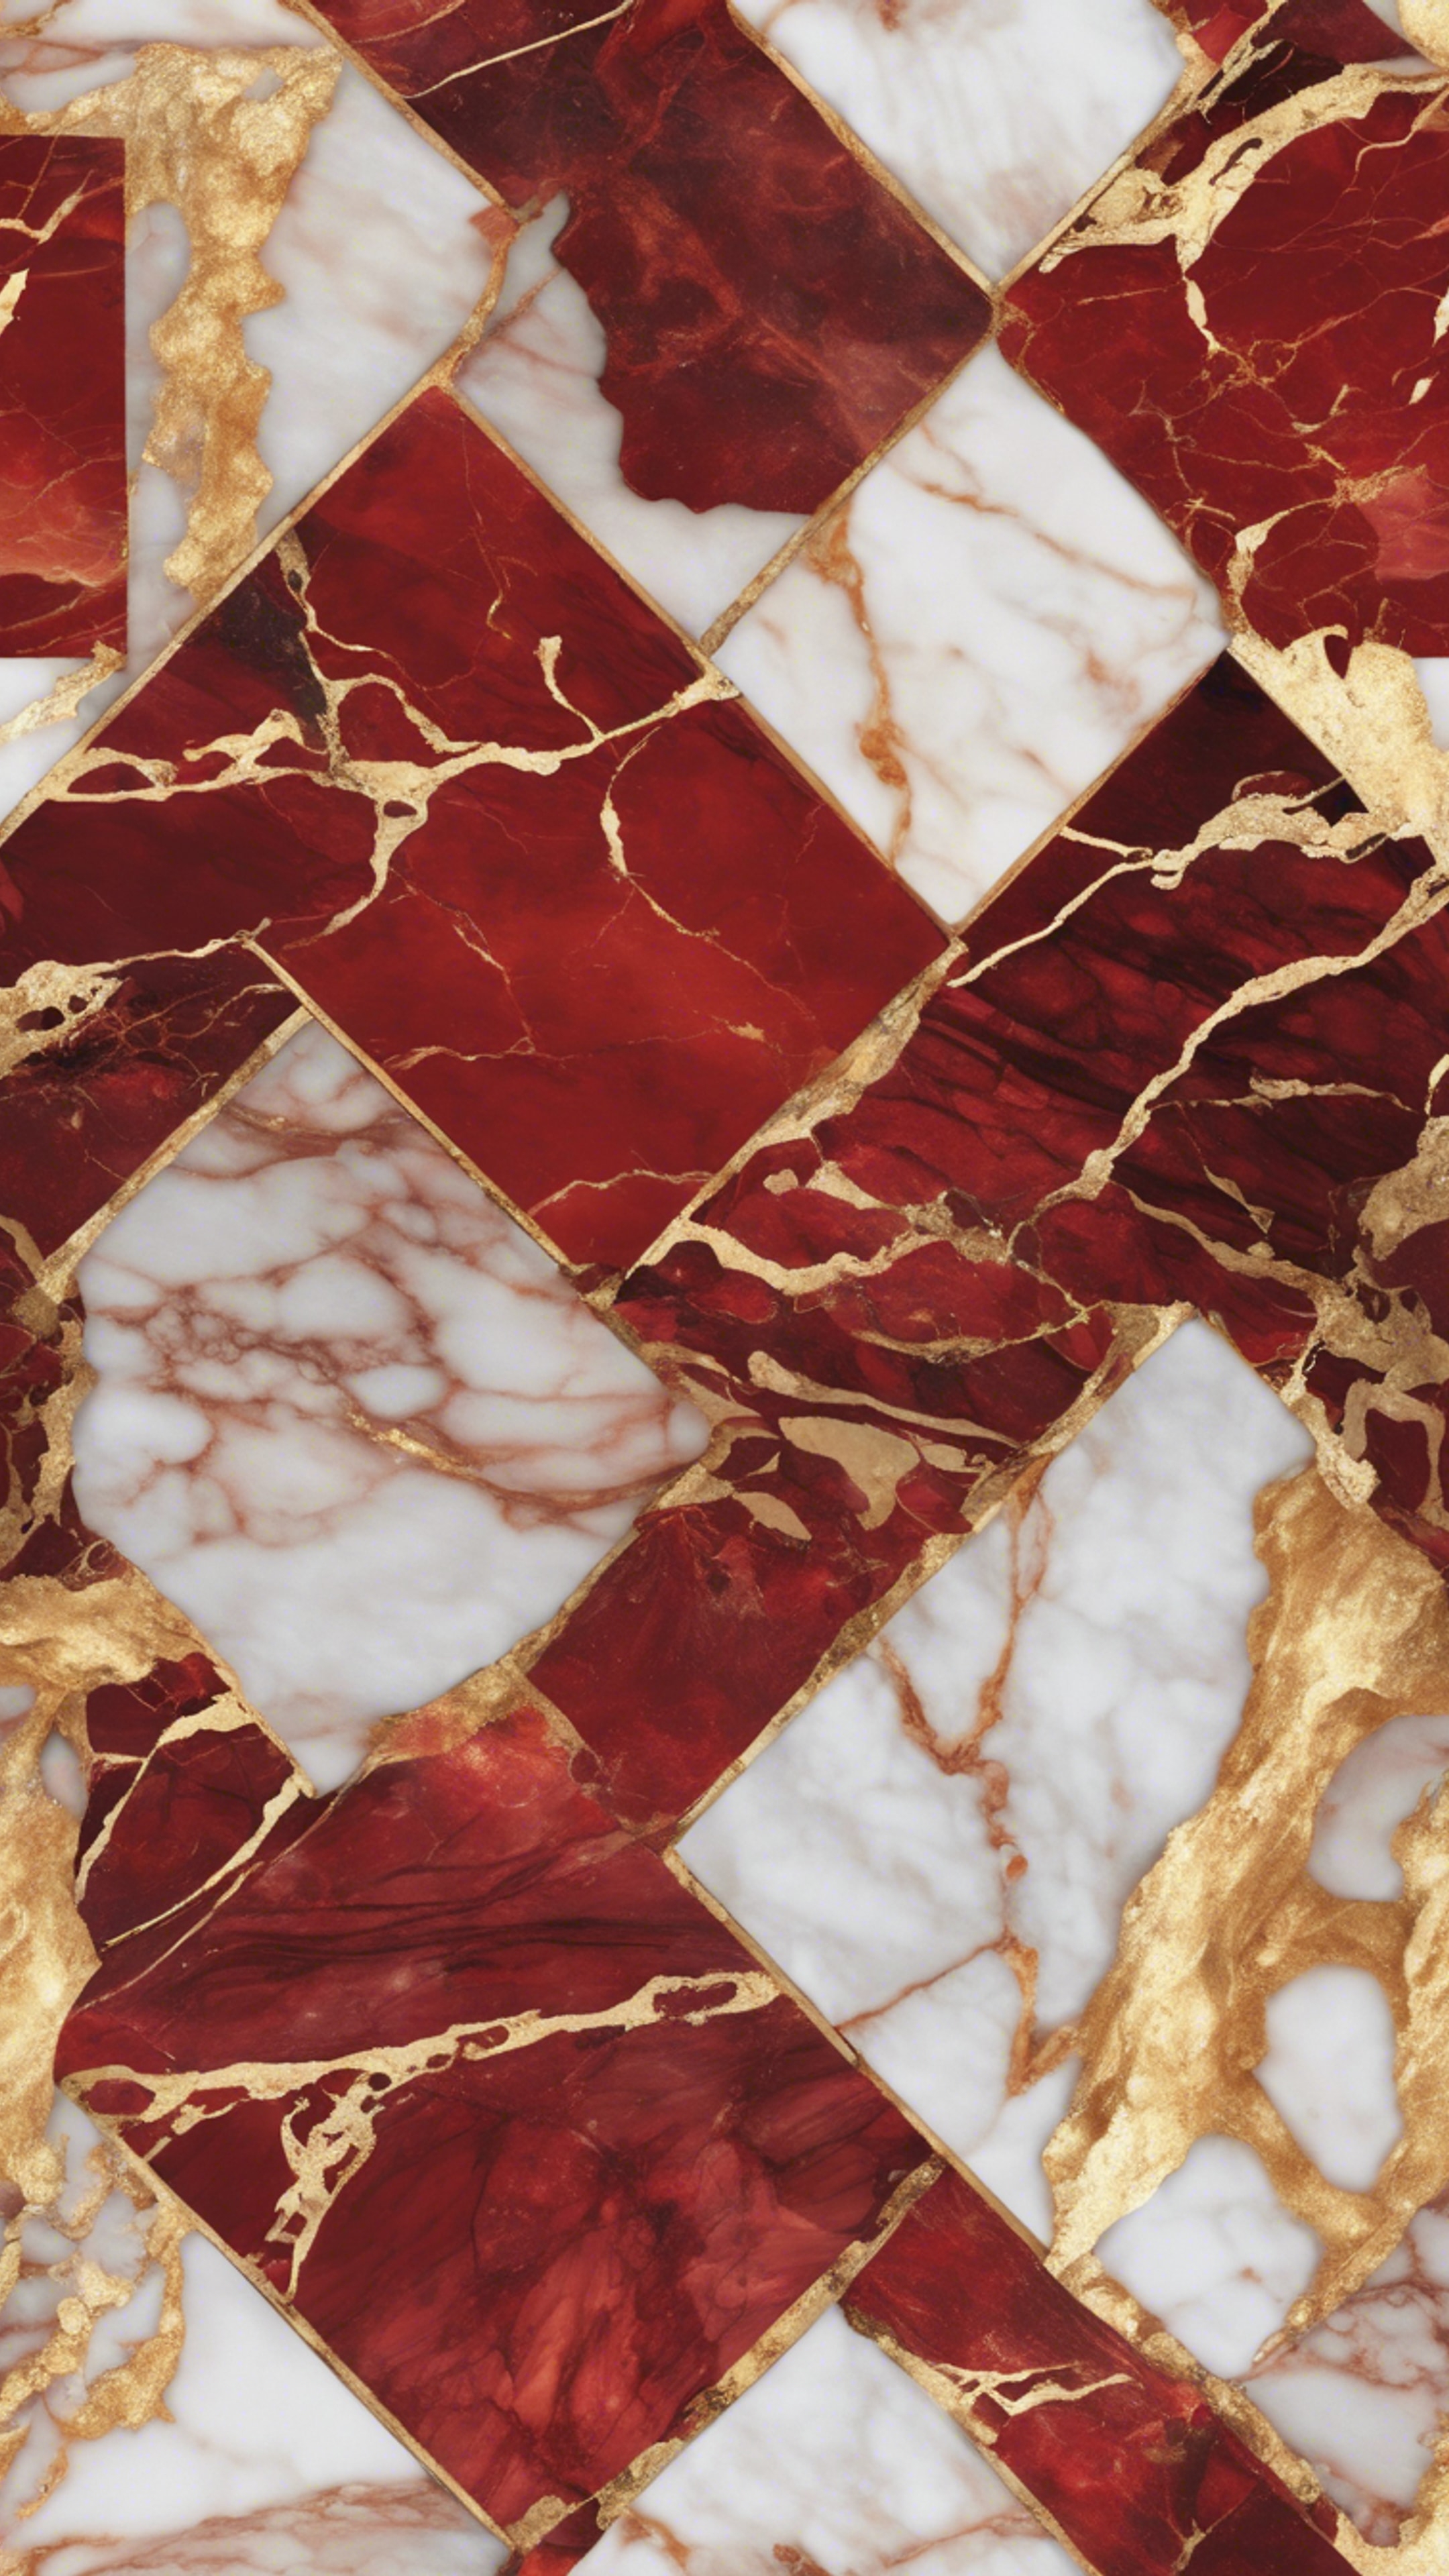 Seamless pattern of red and gold marble resembling the interior of an opulent mansion. Шпалери[0c55d253d85d467eb81b]